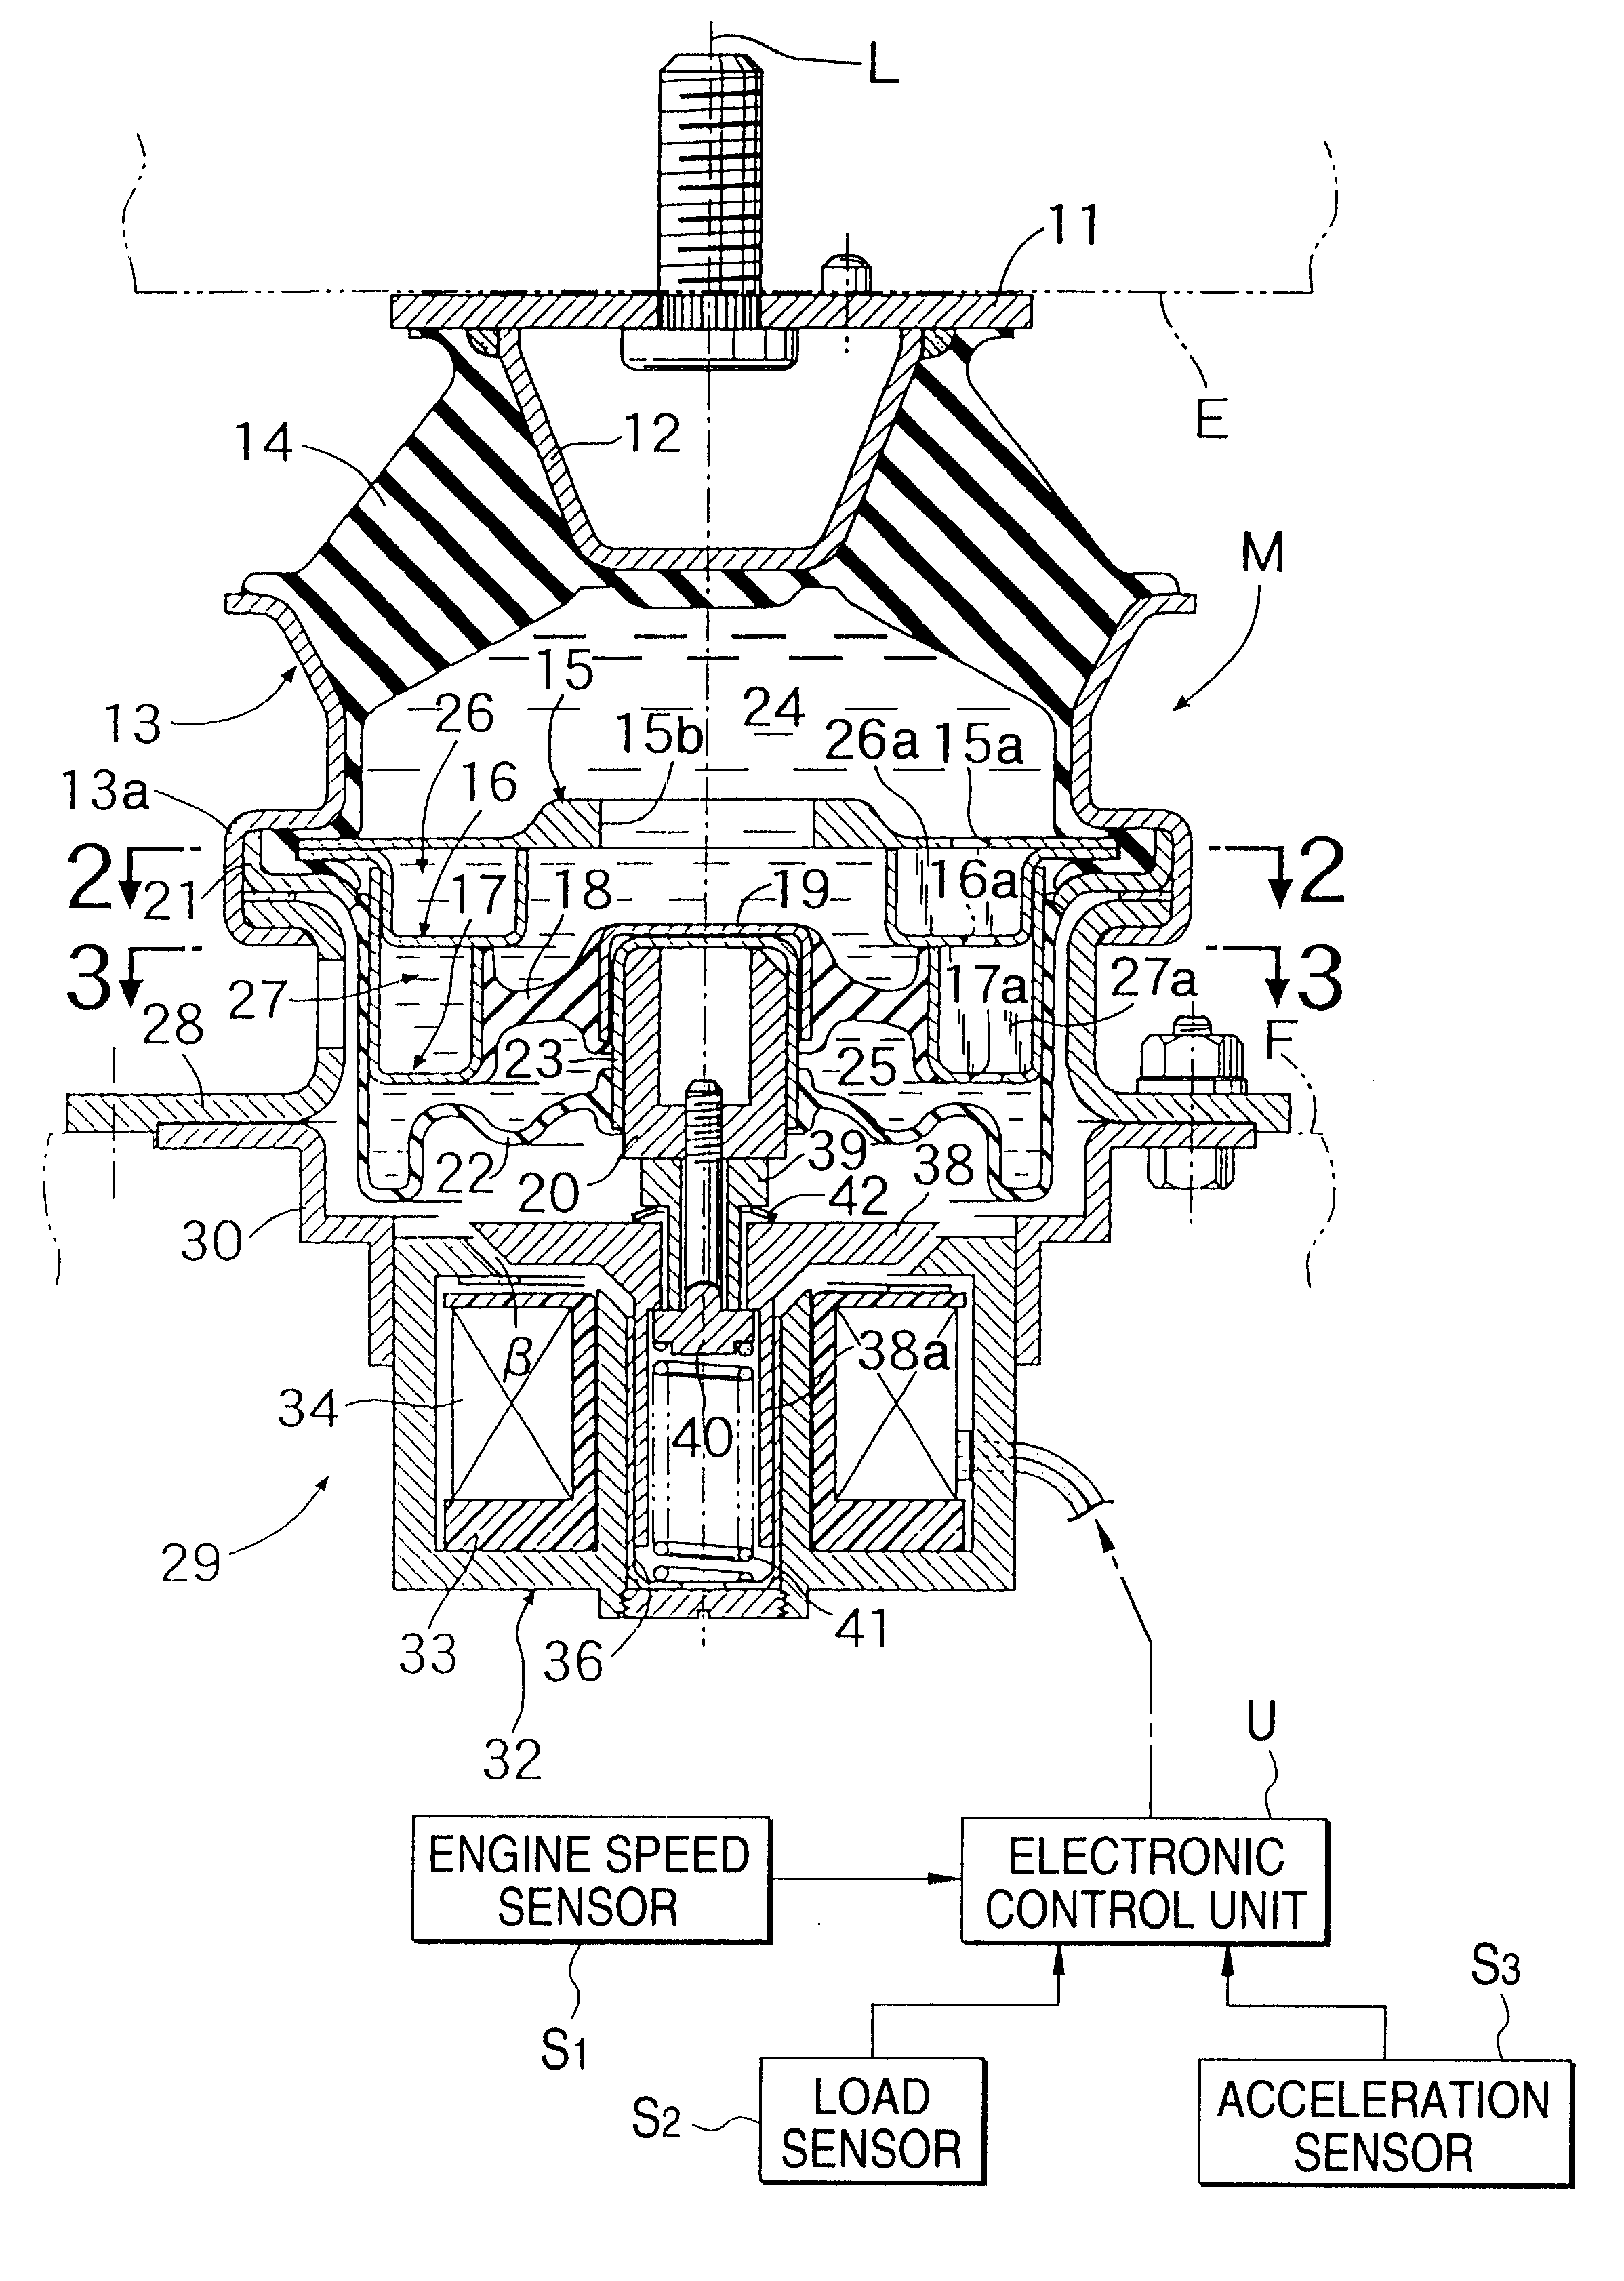 Active vibration isolating support device